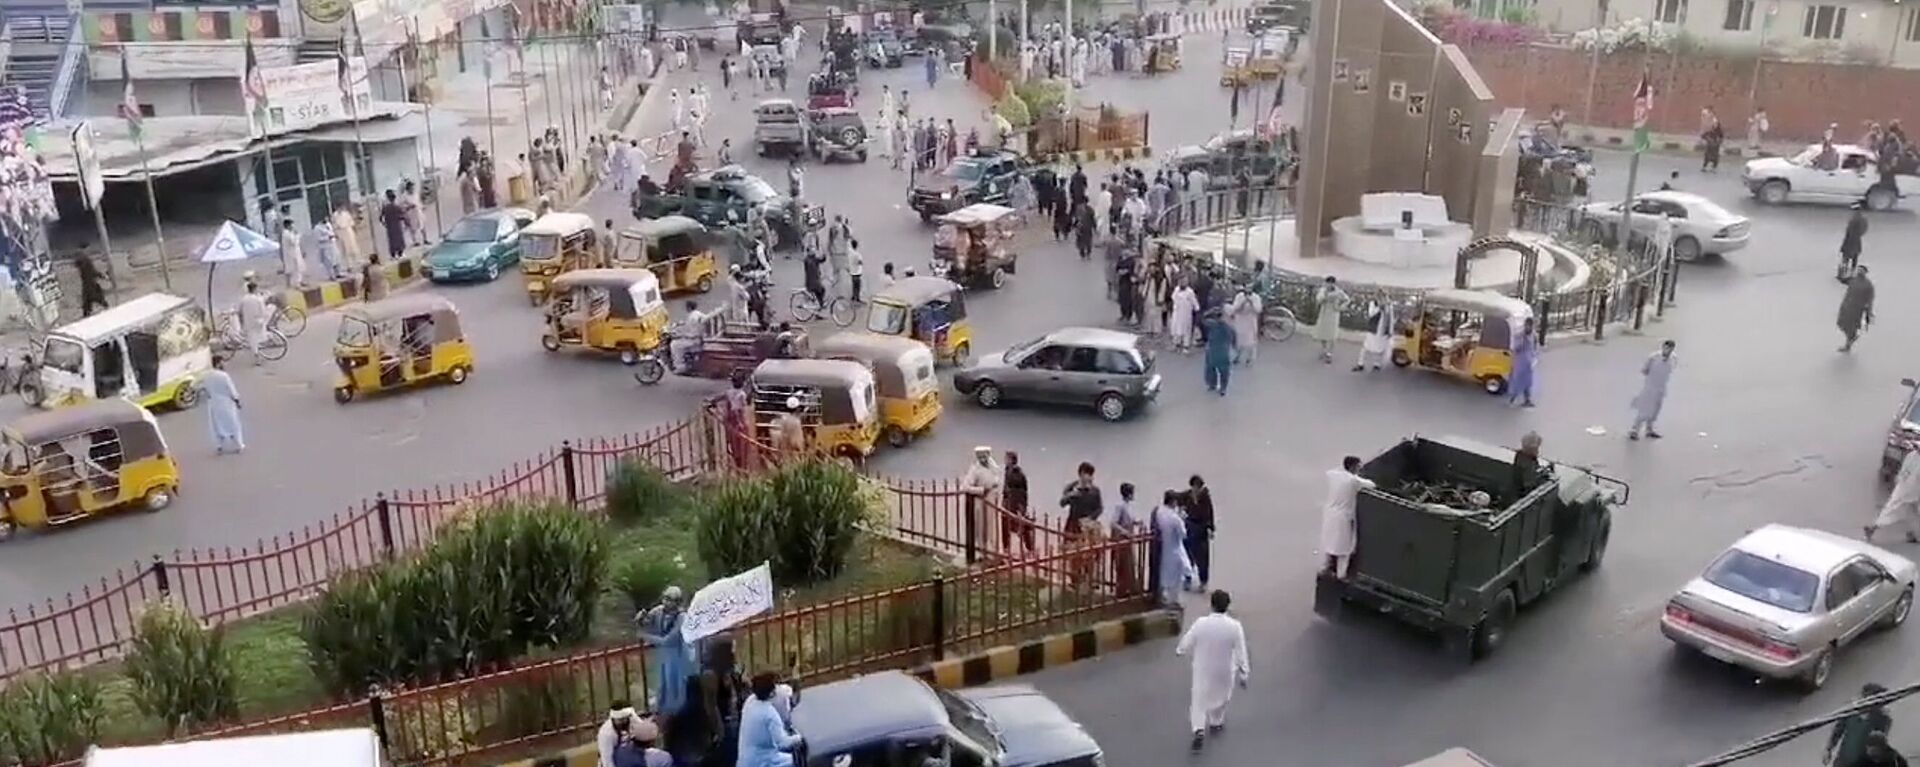 Taliban militants waving a Taliban flag on the back of a pickup truck drive past a crowded street at Pashtunistan Square area in Jalalabad, Afghanistan in this still image taken from social media video uploaded on August 15, 2021. Social media website/via REUTERS THIS IMAGE HAS BEEN SUPPLIED BY A THIRD PARTY. - Sputnik International, 1920